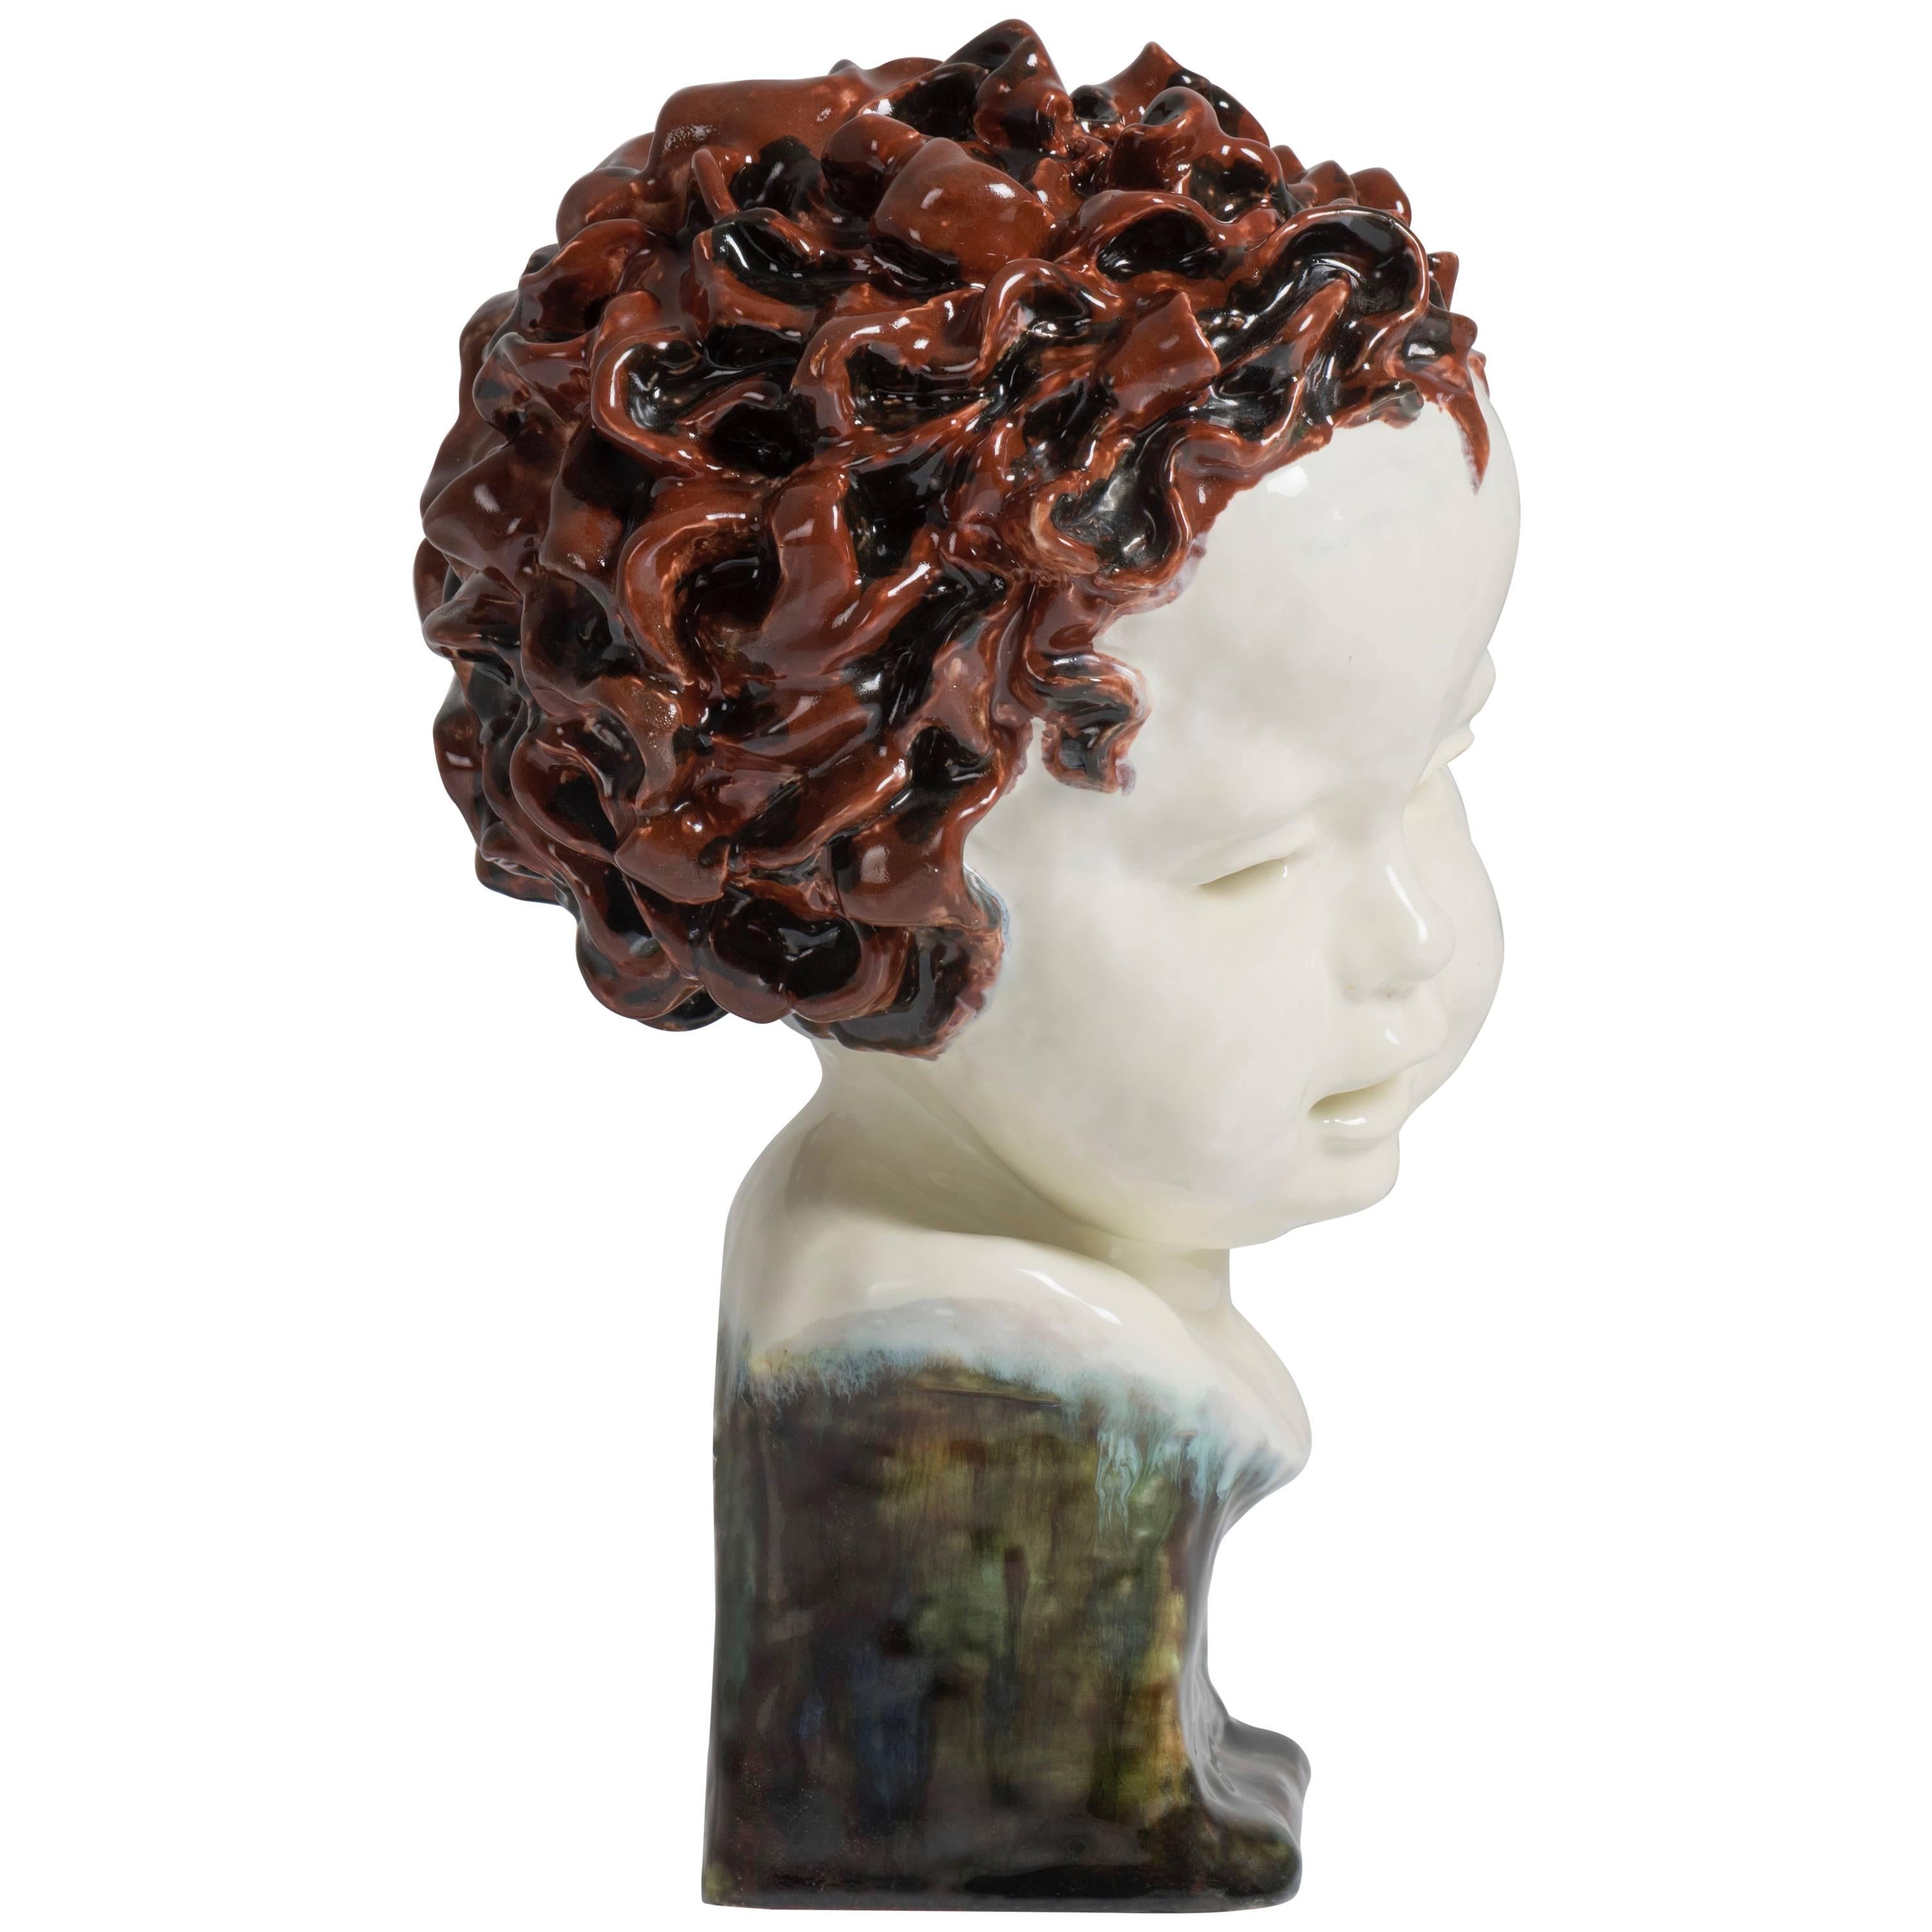 This child head is a unique piece. The colors are very subtle and the curly hair very well sculpted.
Signed and dated on the back and Goldscheider stamps on the inside.

Dimensions: 26 cm height x 17 cm diameter.

In 1885, Friedrich Goldscheider